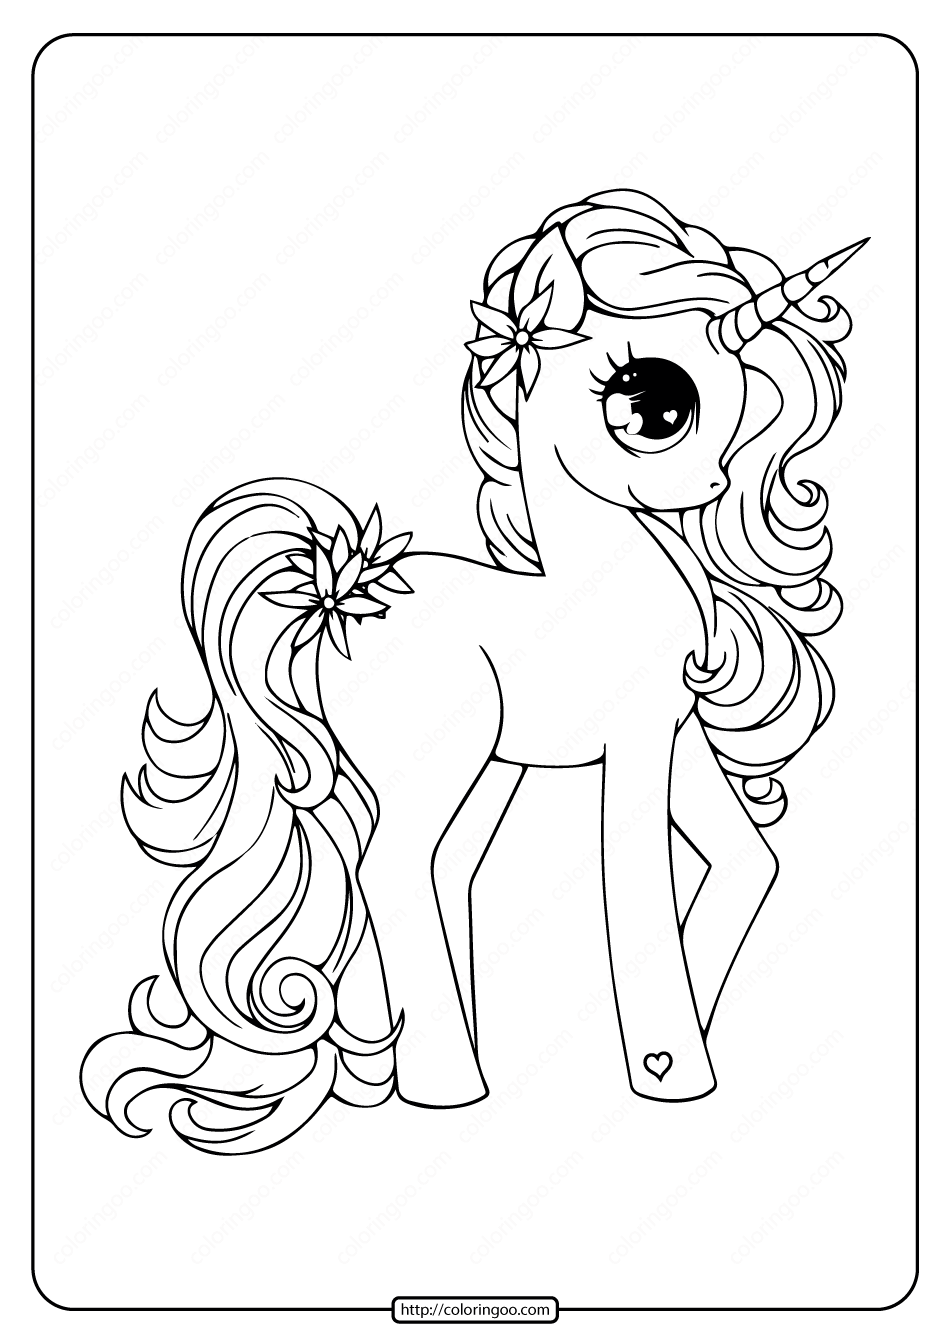 Printable Free Unicorn Pdf Coloring Book Unicorn Coloring Pages 